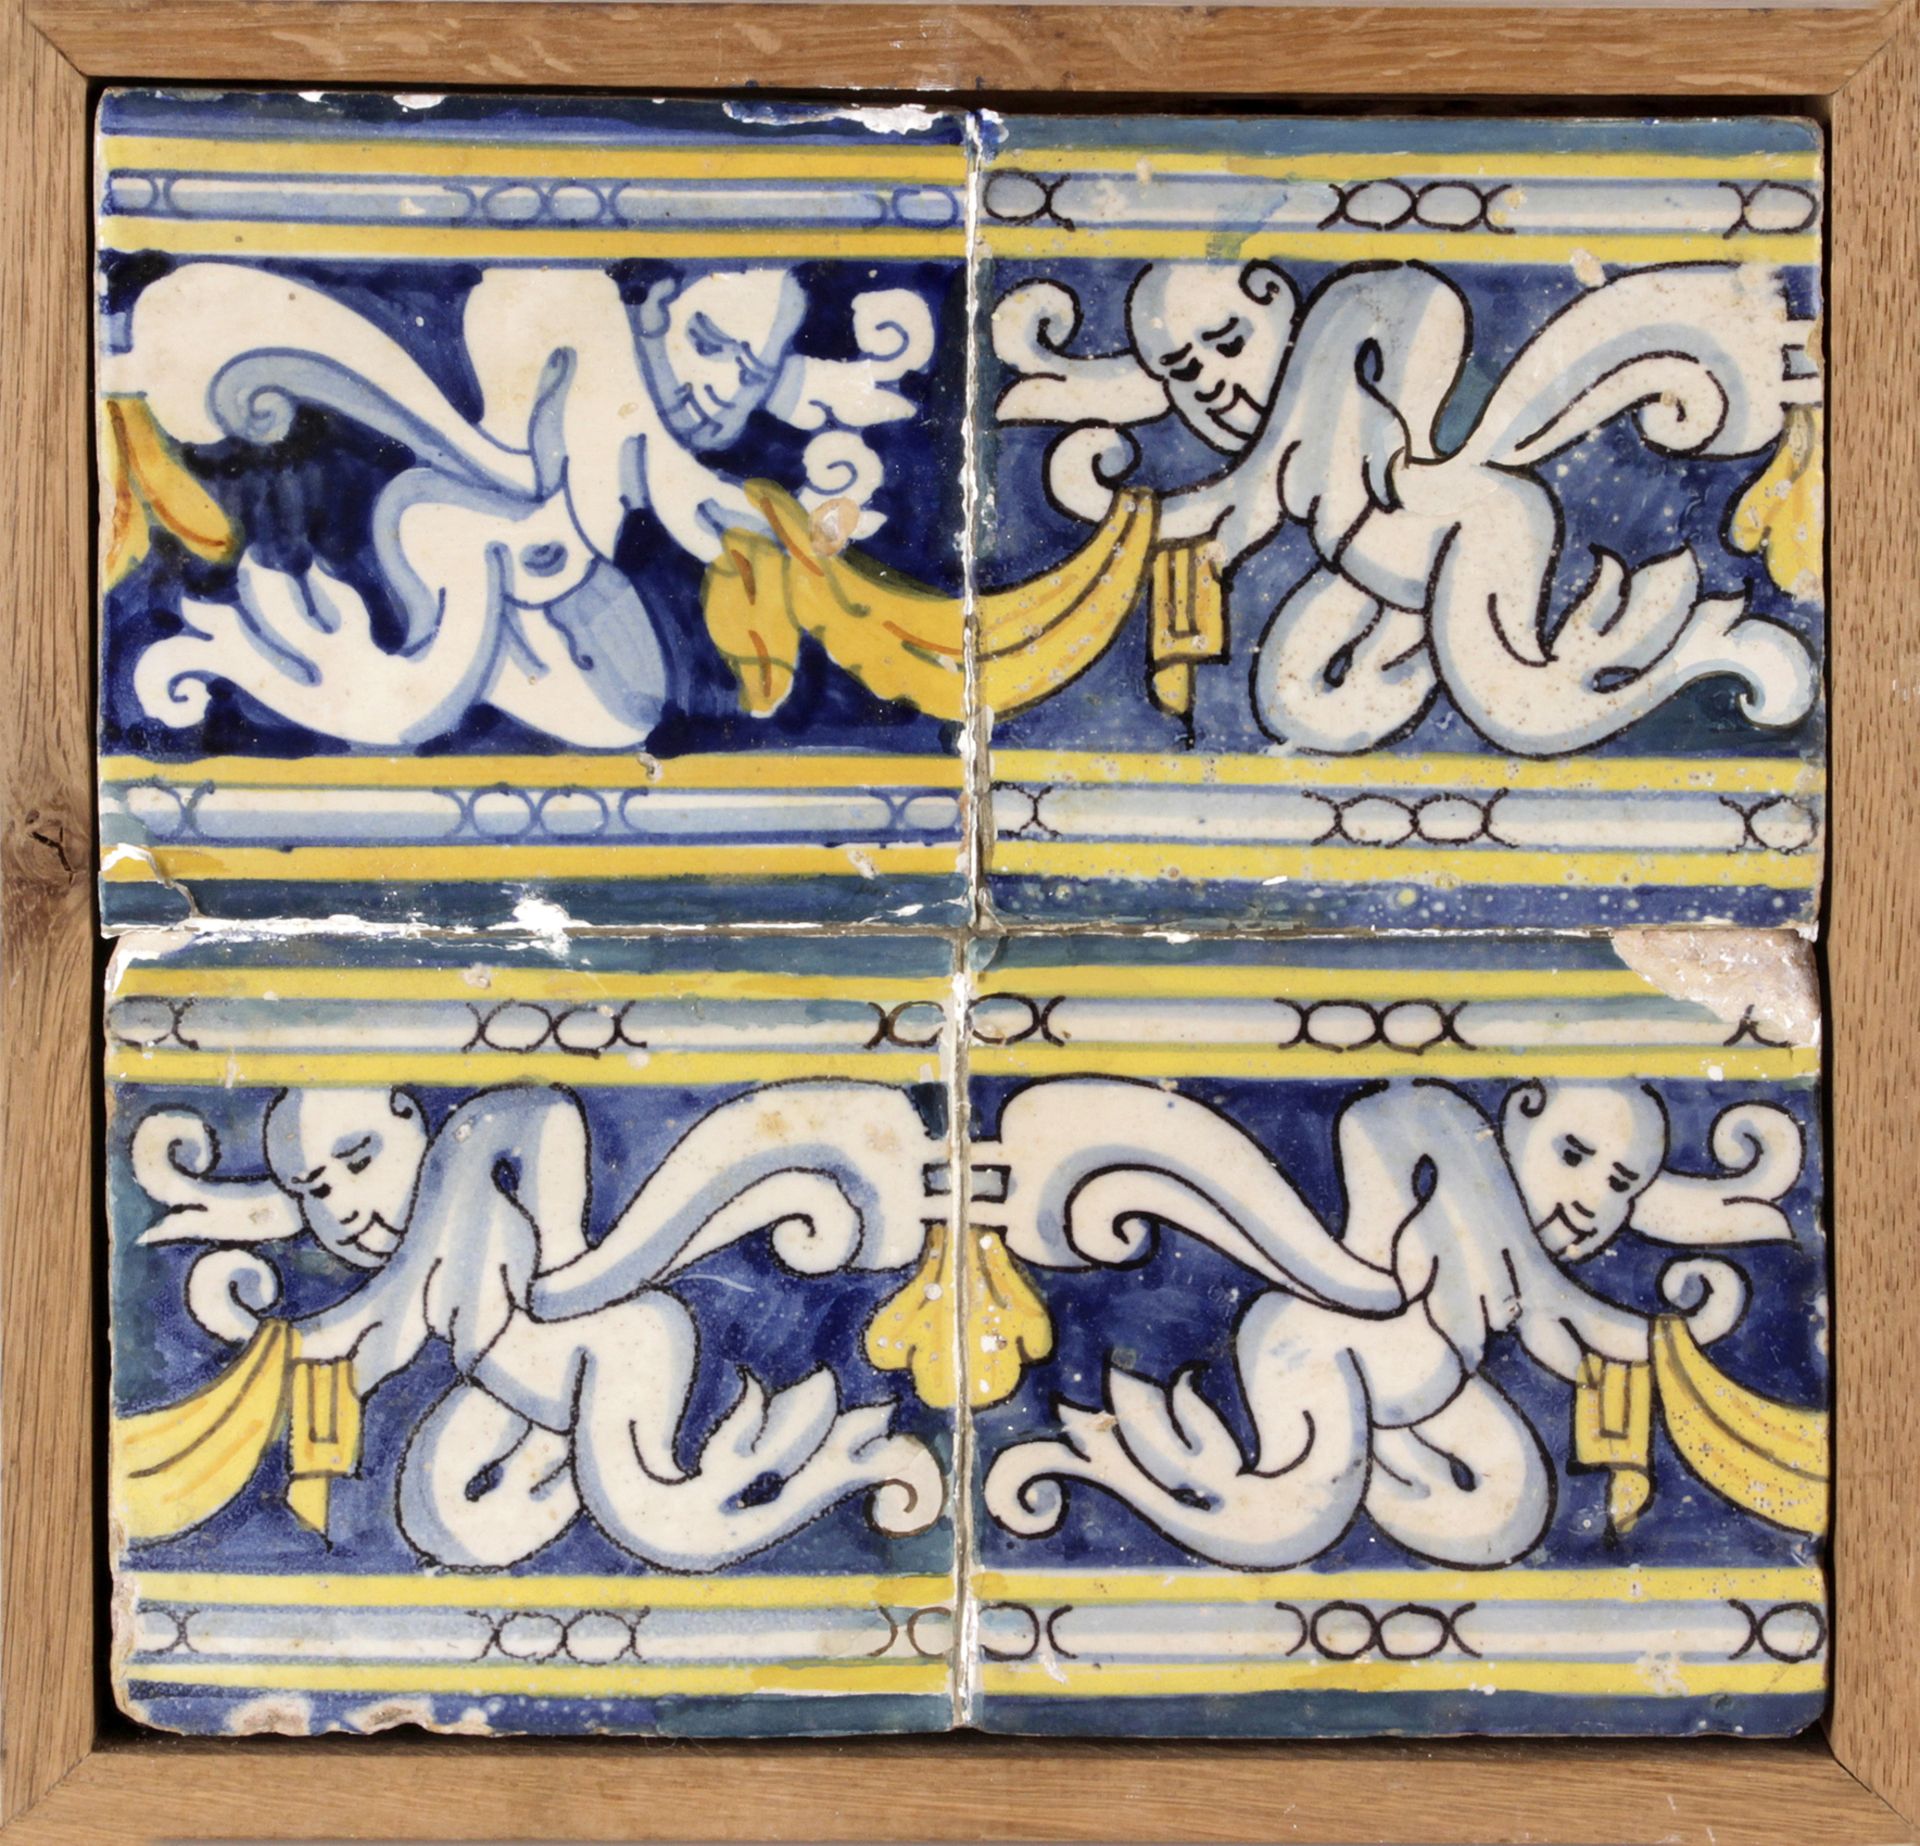 A 16th-17th centuries wallplaque with four Catalan showing tiles